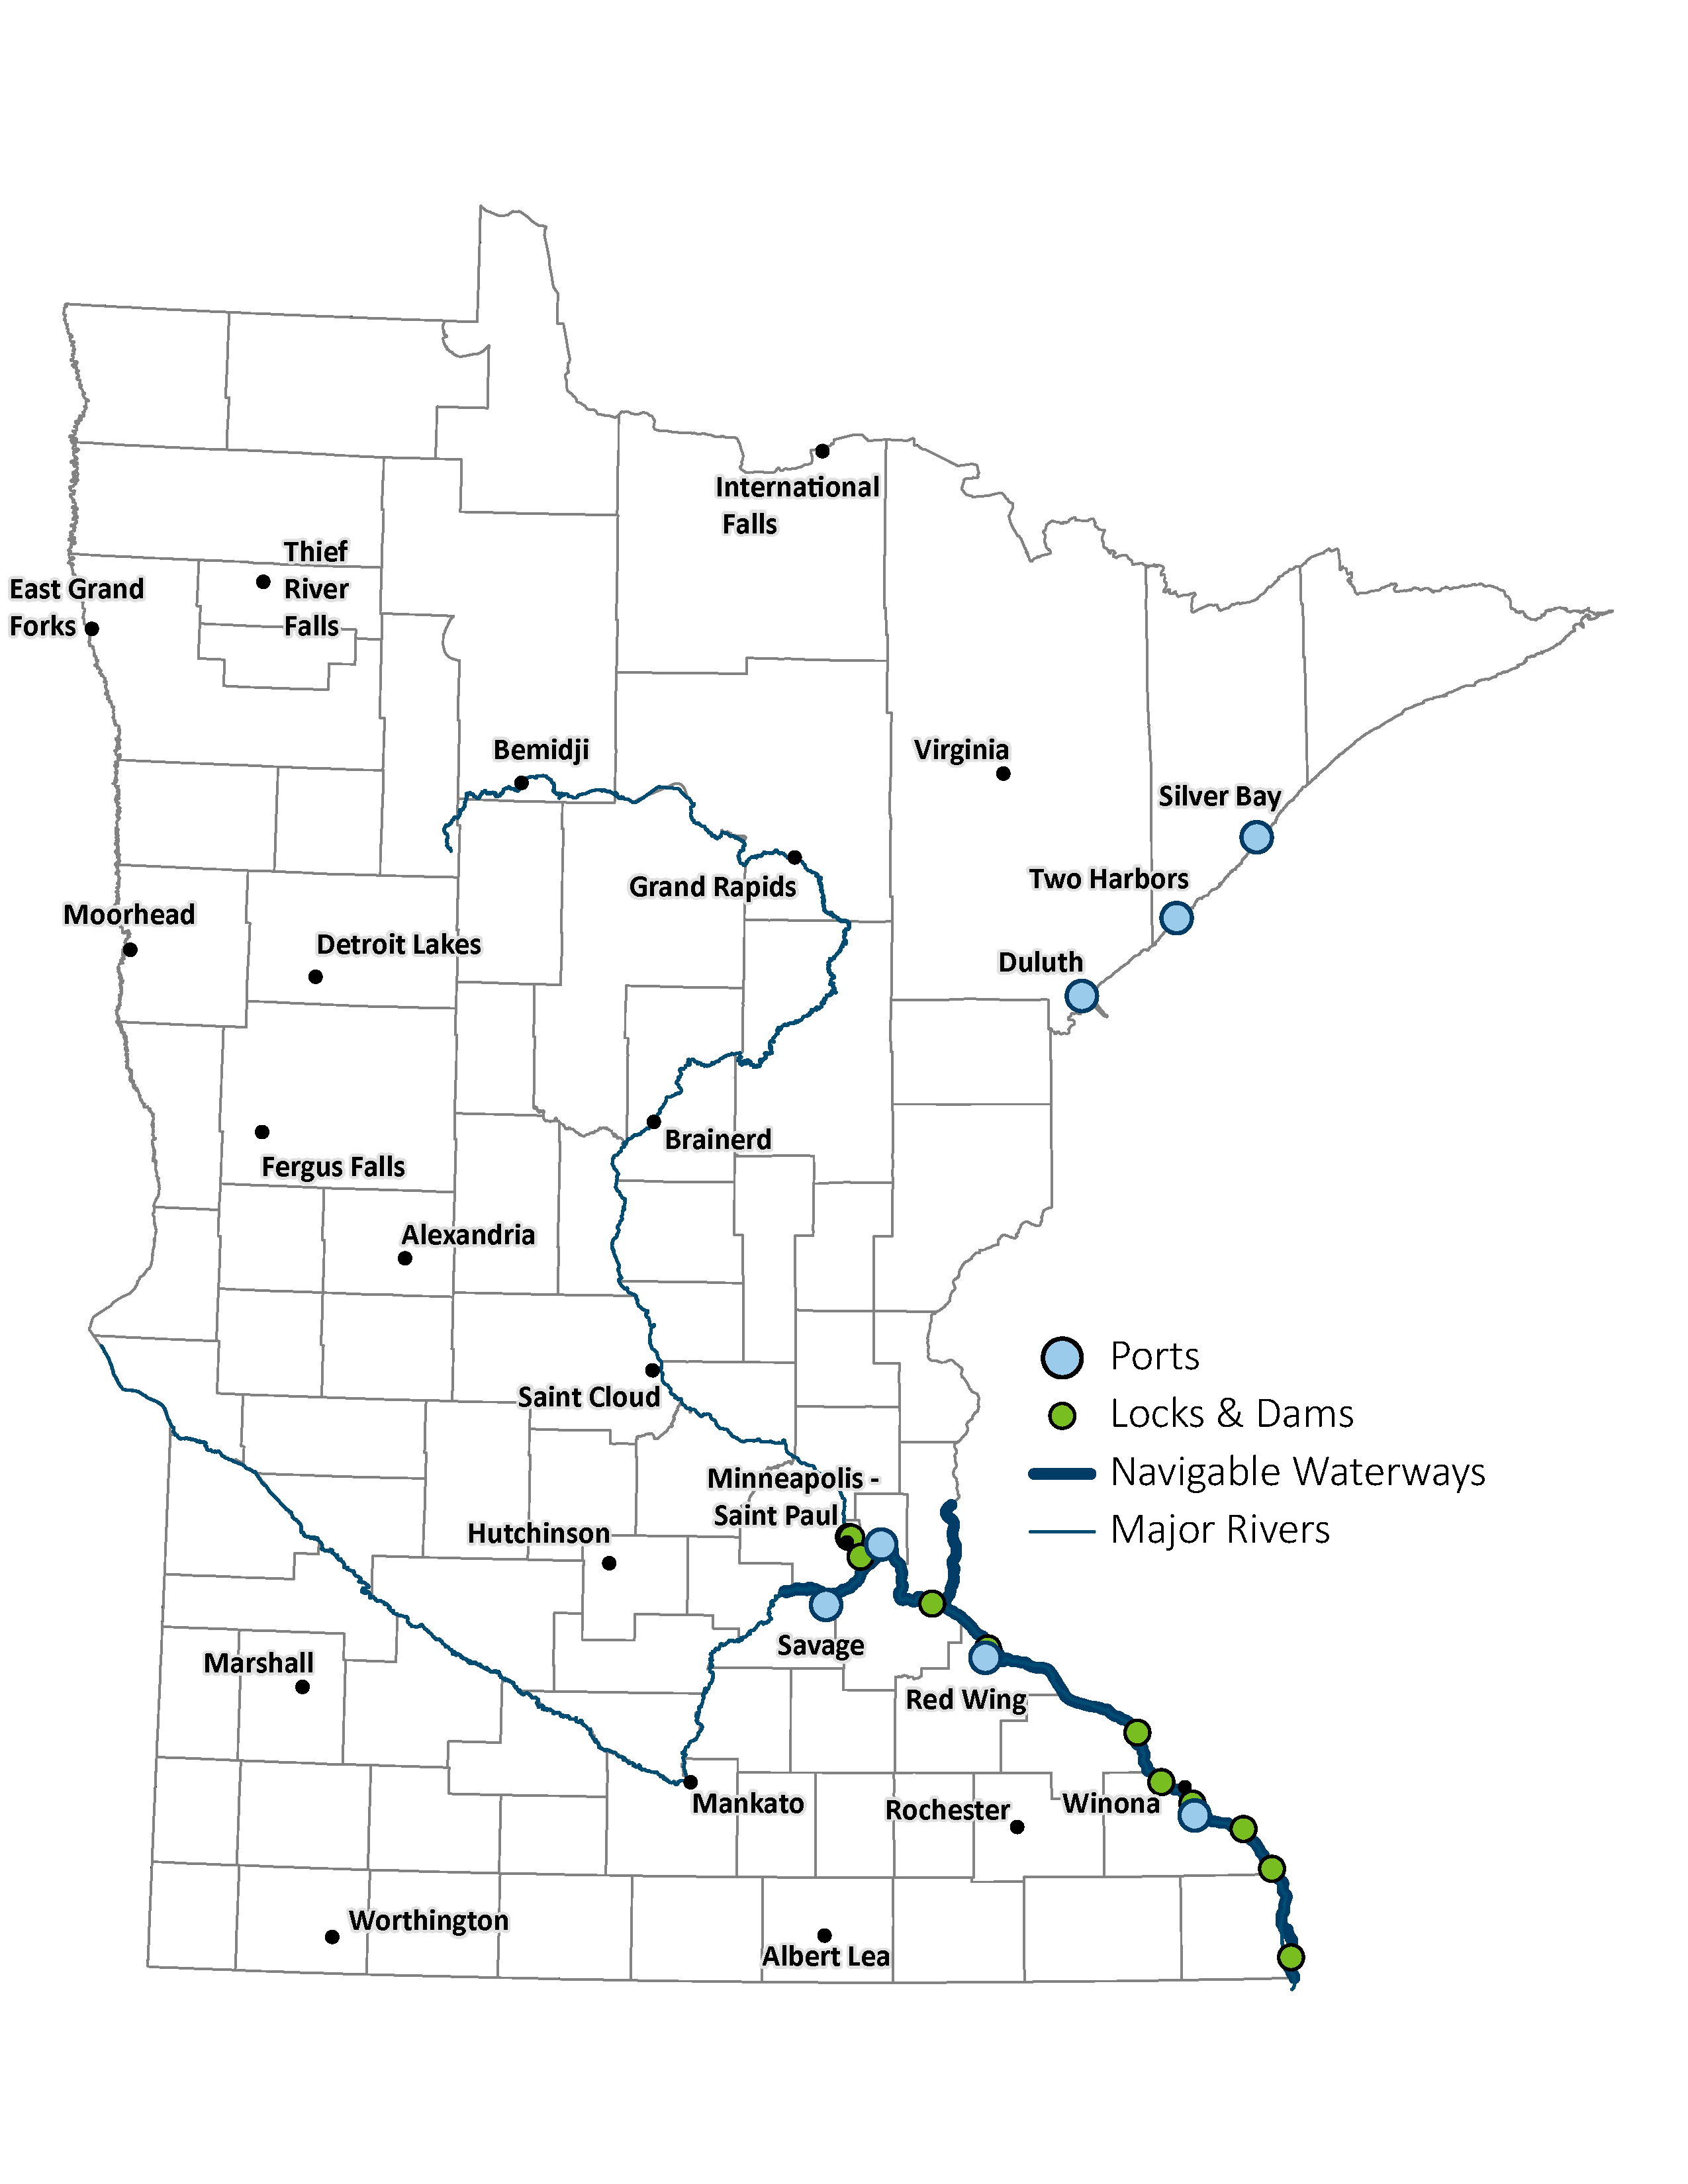 Minnesota map that shows three ports on Lake Superior and four ports on the Mississippi river system. The map also shows locks and dams, major rivers and navigable waterways in Minnesota.